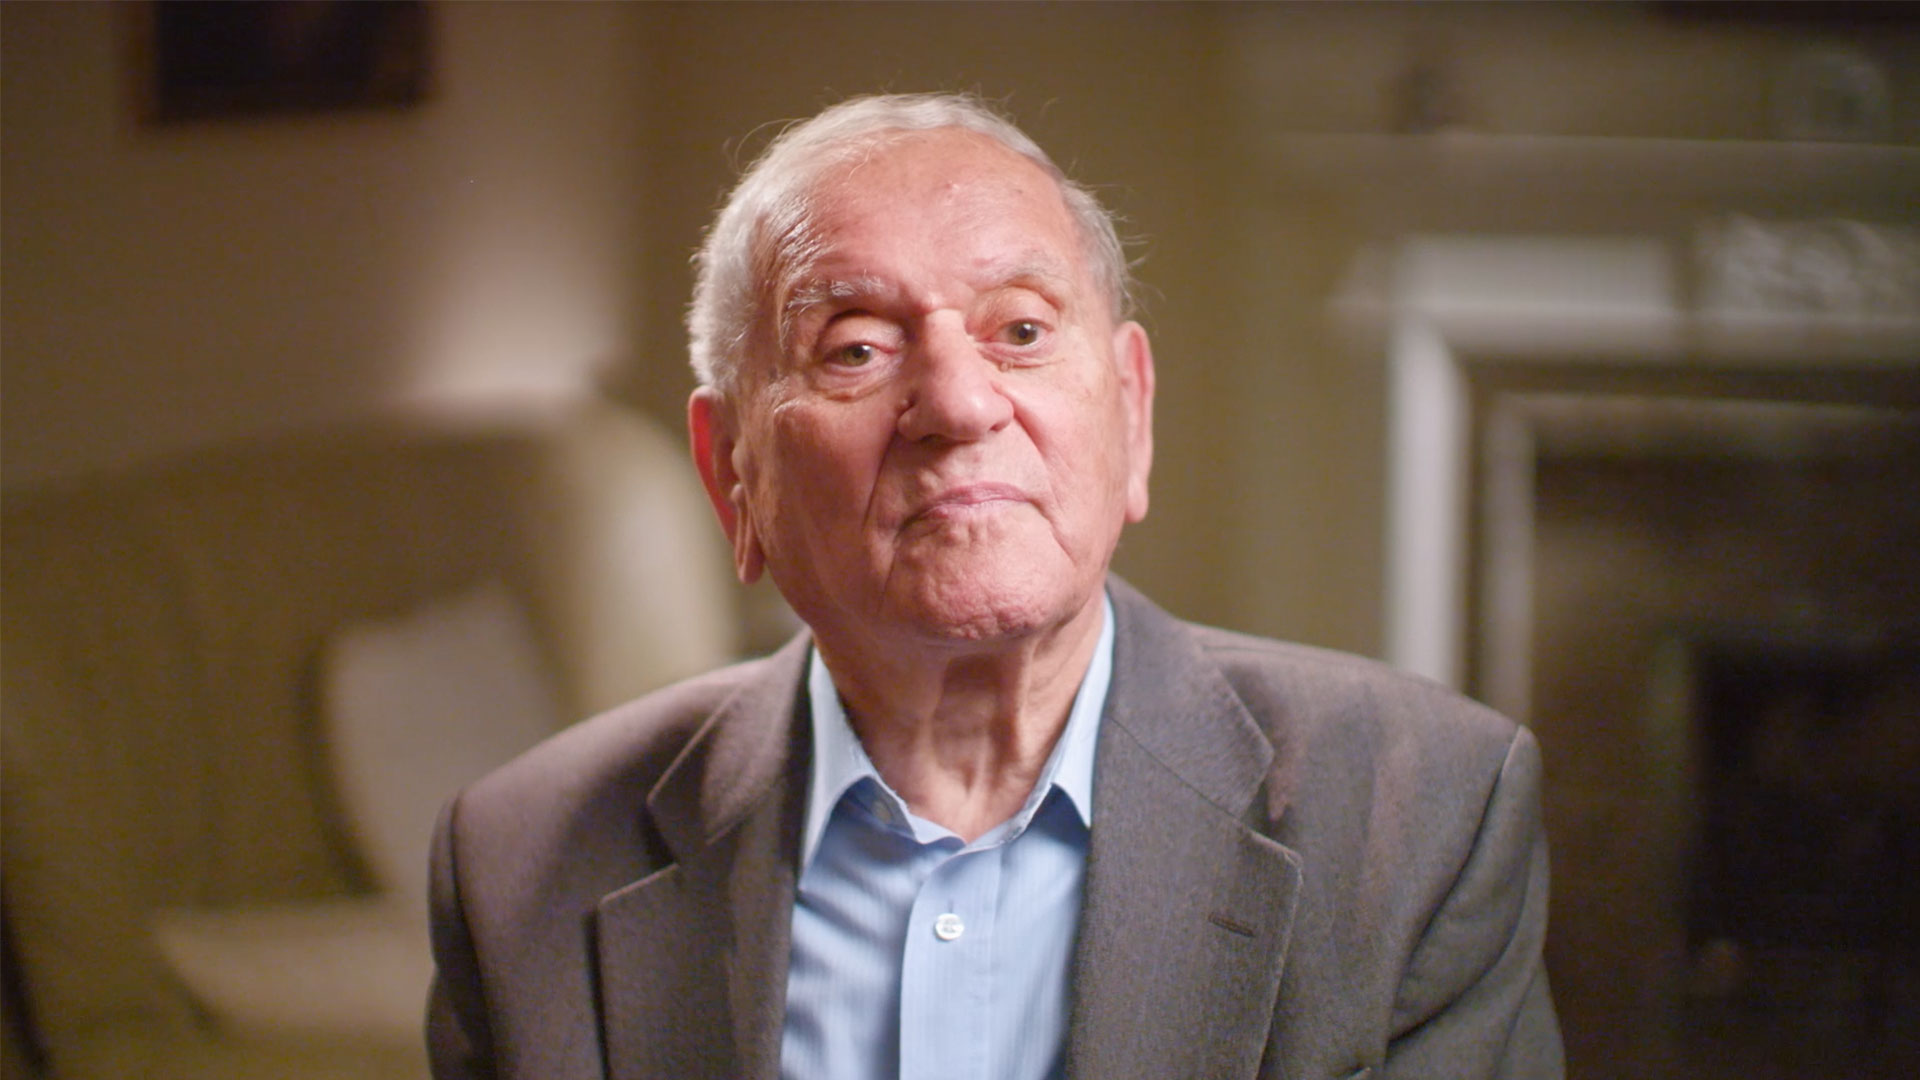 Arek Hersh – “In Auschwitz You Didn’t Have a Name, You Had a Number”